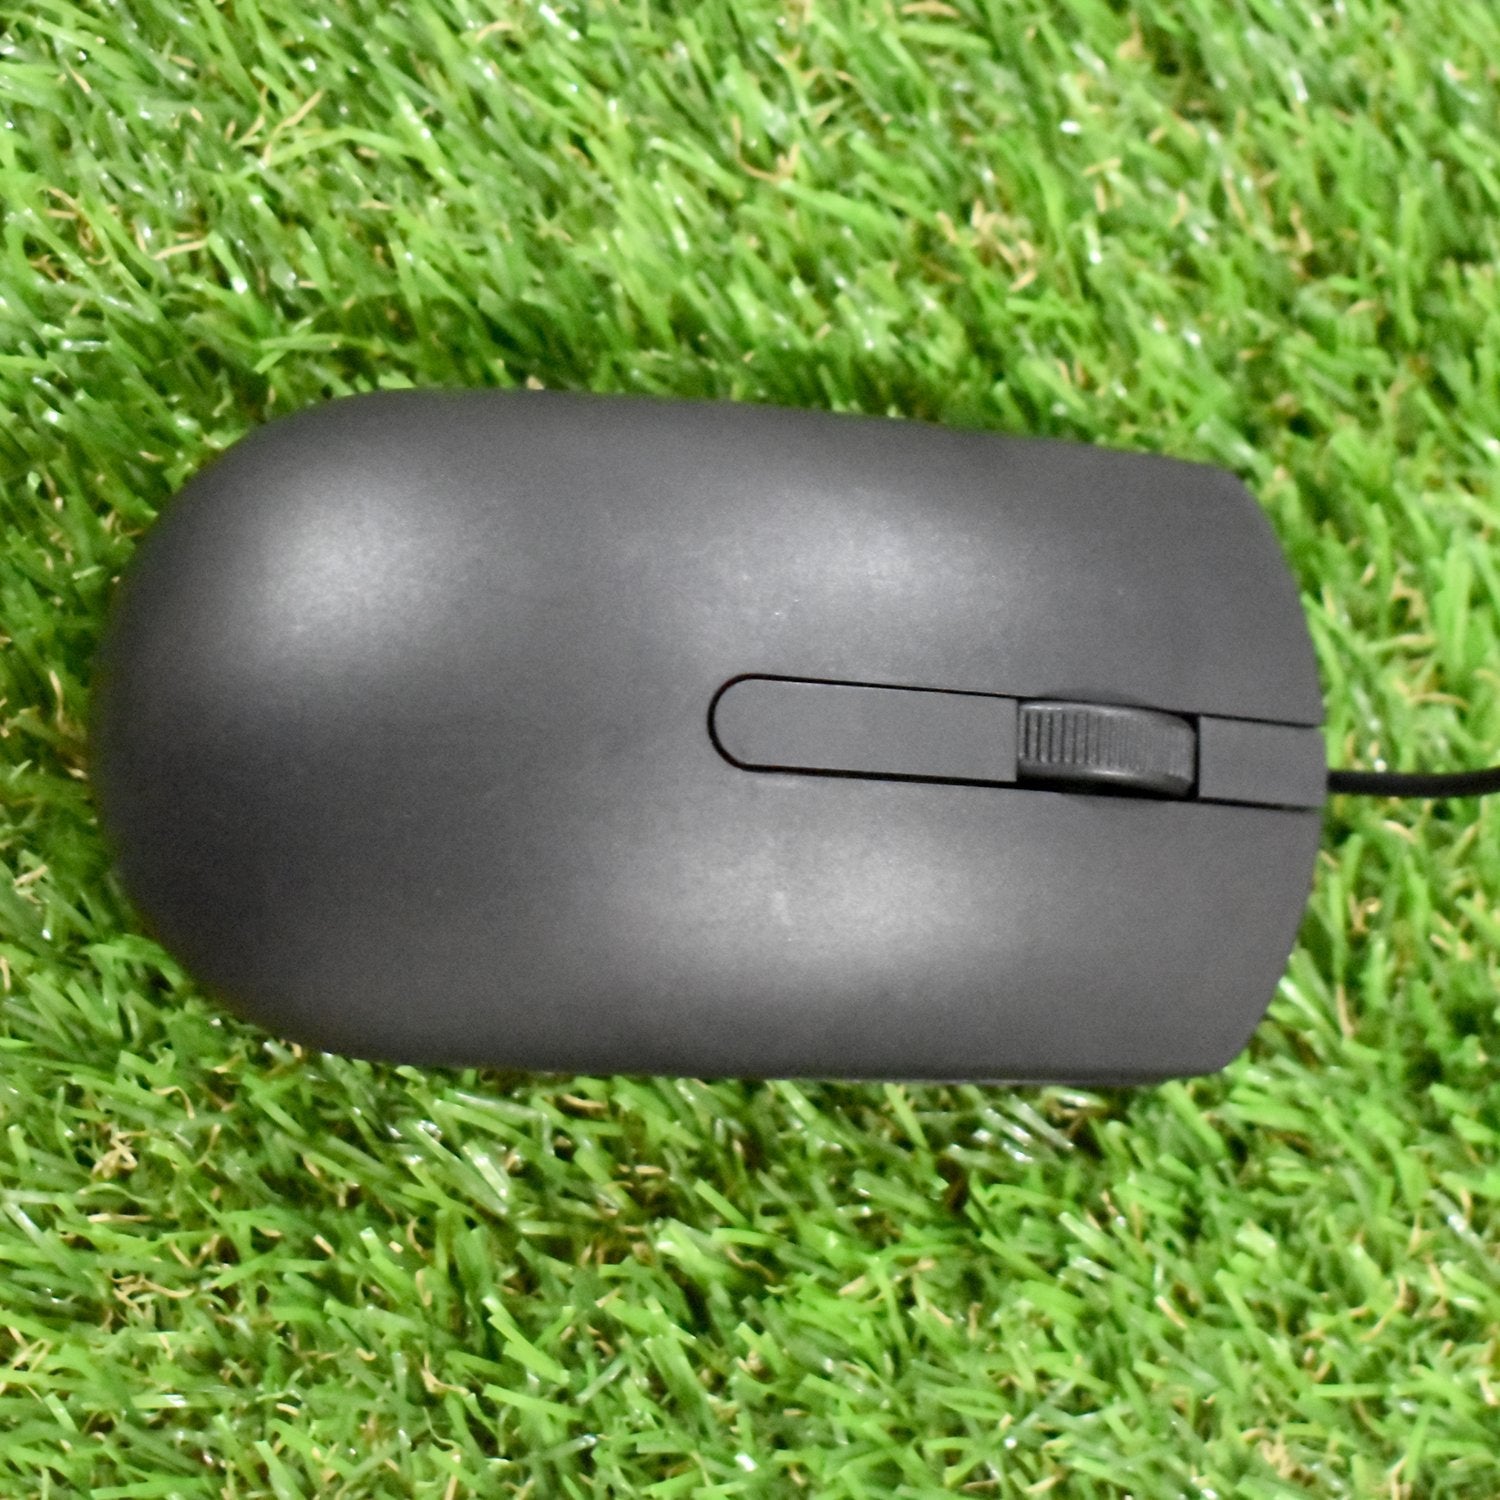 6022 Computer Wired Optical Mouse DeoDap